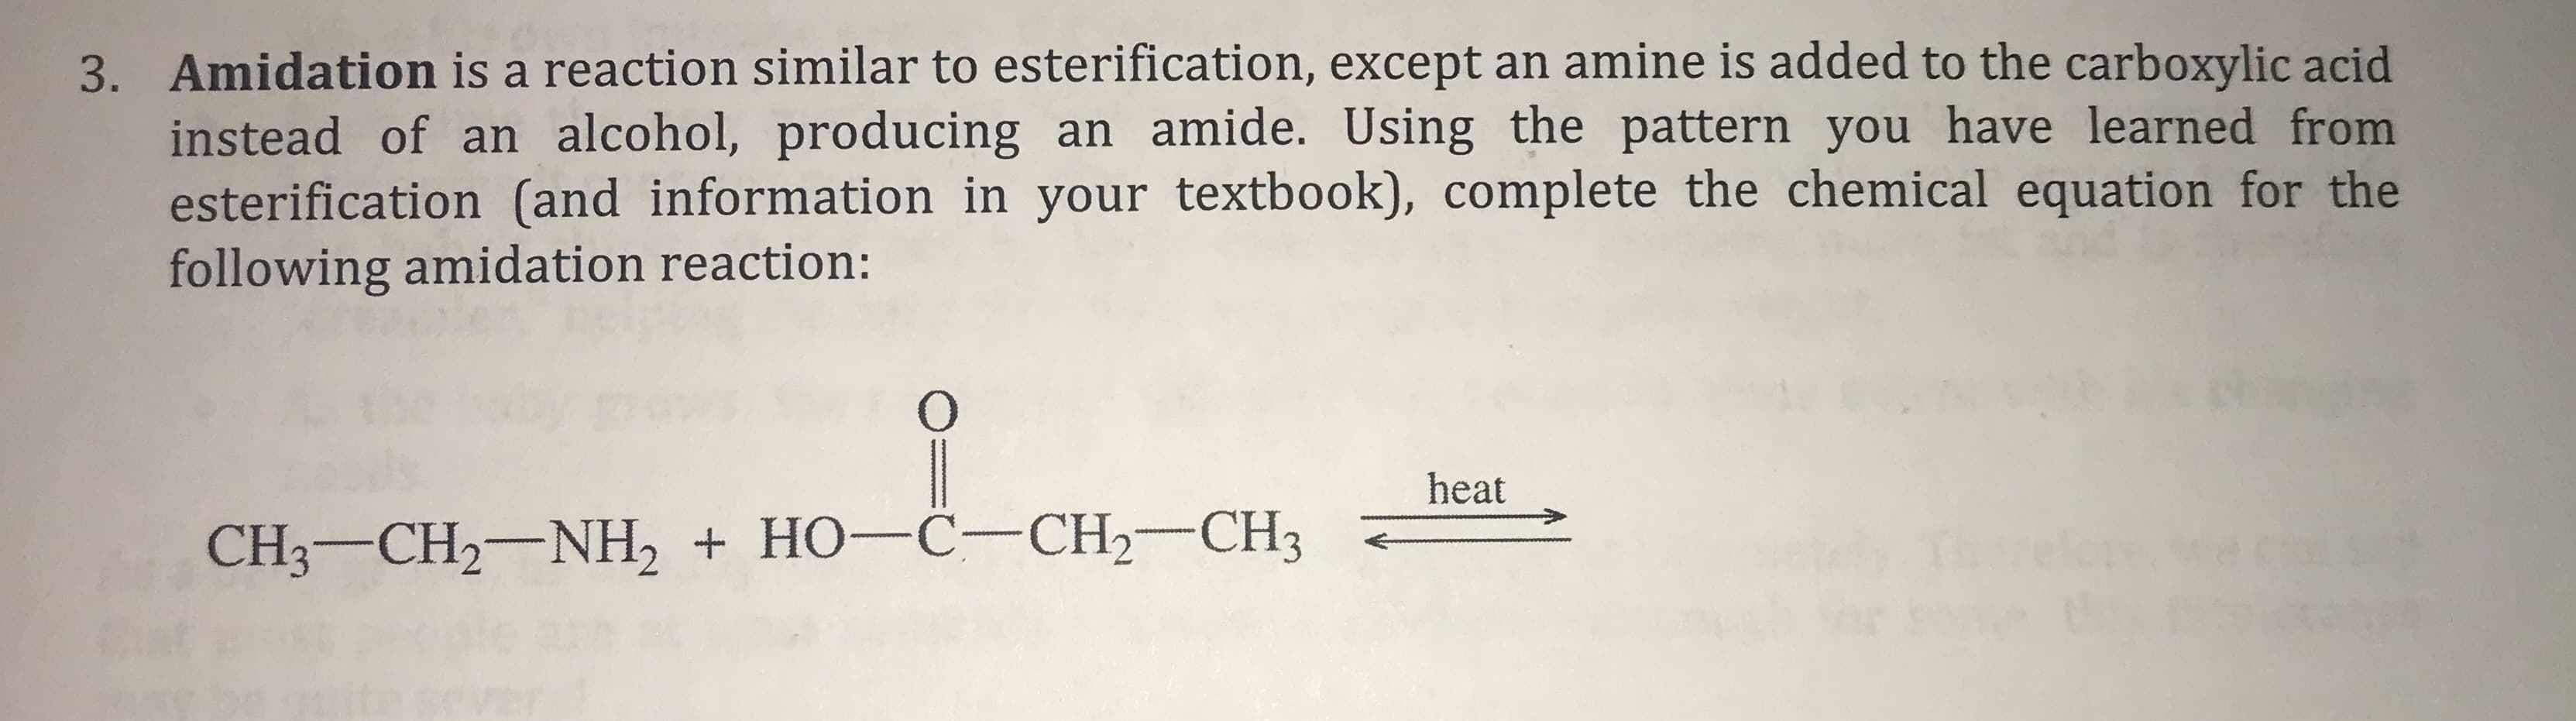 3. Amidation is a reaction similar to esterification, except an amine is added to the carboxylic acid
instead of an alcohol, producing an amide. Using the pattern you have learned from
esterification (and information in your textbook), complete the chemical equation for the
following amidation reaction:
O
heat
CH3 CH2 NH2 HO-C- CH2- CH3
